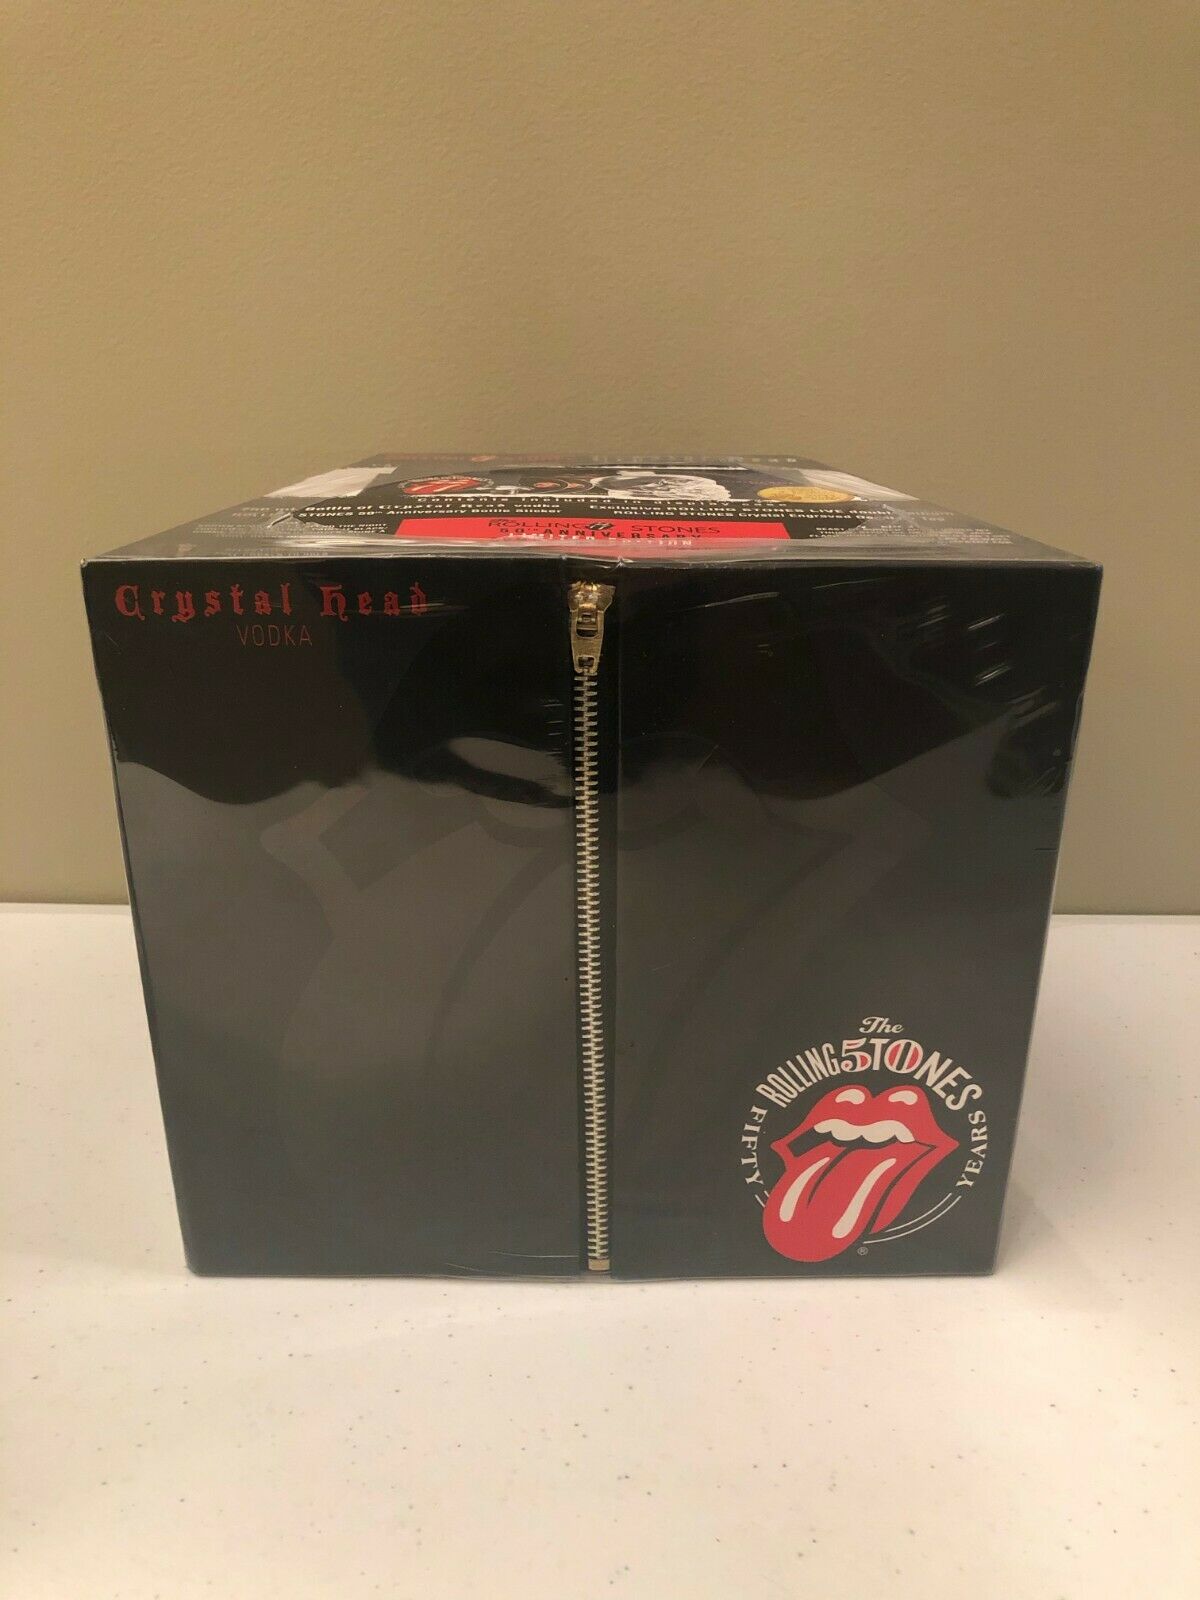 popsike.com - Rolling Stones 50th Anniversary Crystal Head Vodka Set,  Limited Edition, SEALED - auction details